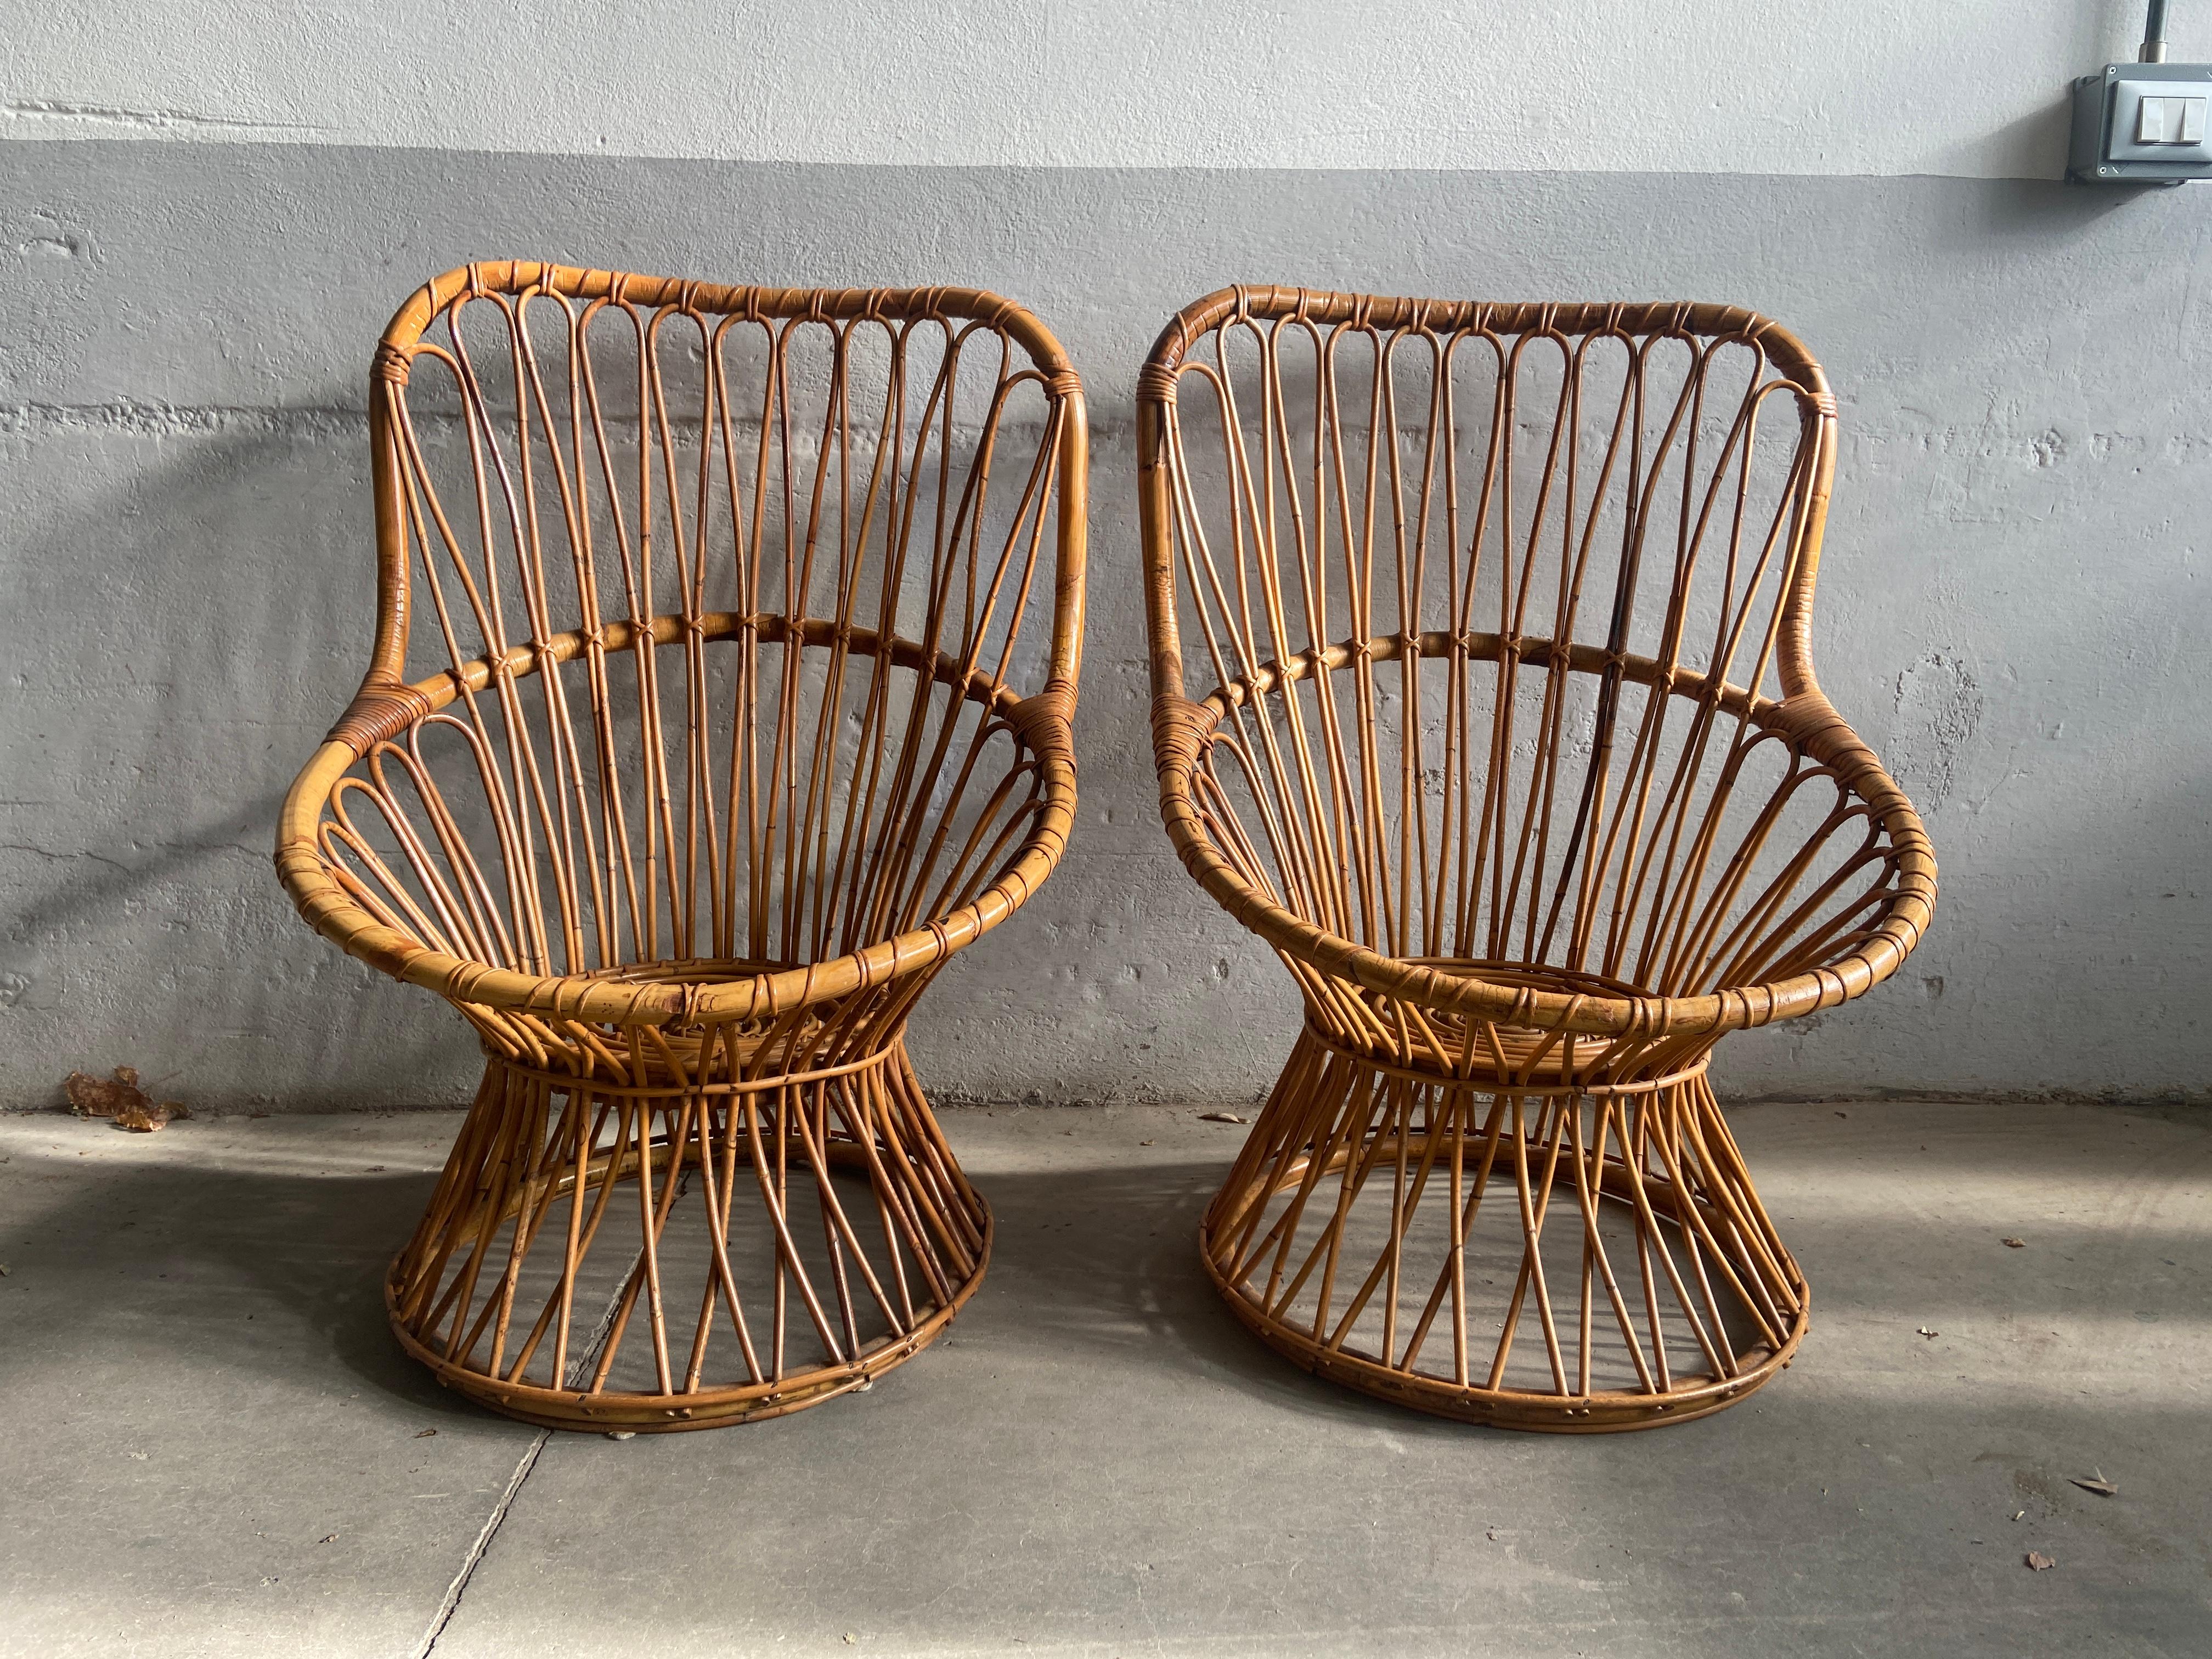 Mid-Century Modern Italian Pair of bent Bamboo and Rattan patio Armchairs in the style of Bonacina and Tito Agnoli.
The Set is in really good vintage conditions with a wonderful patina due to age and use.